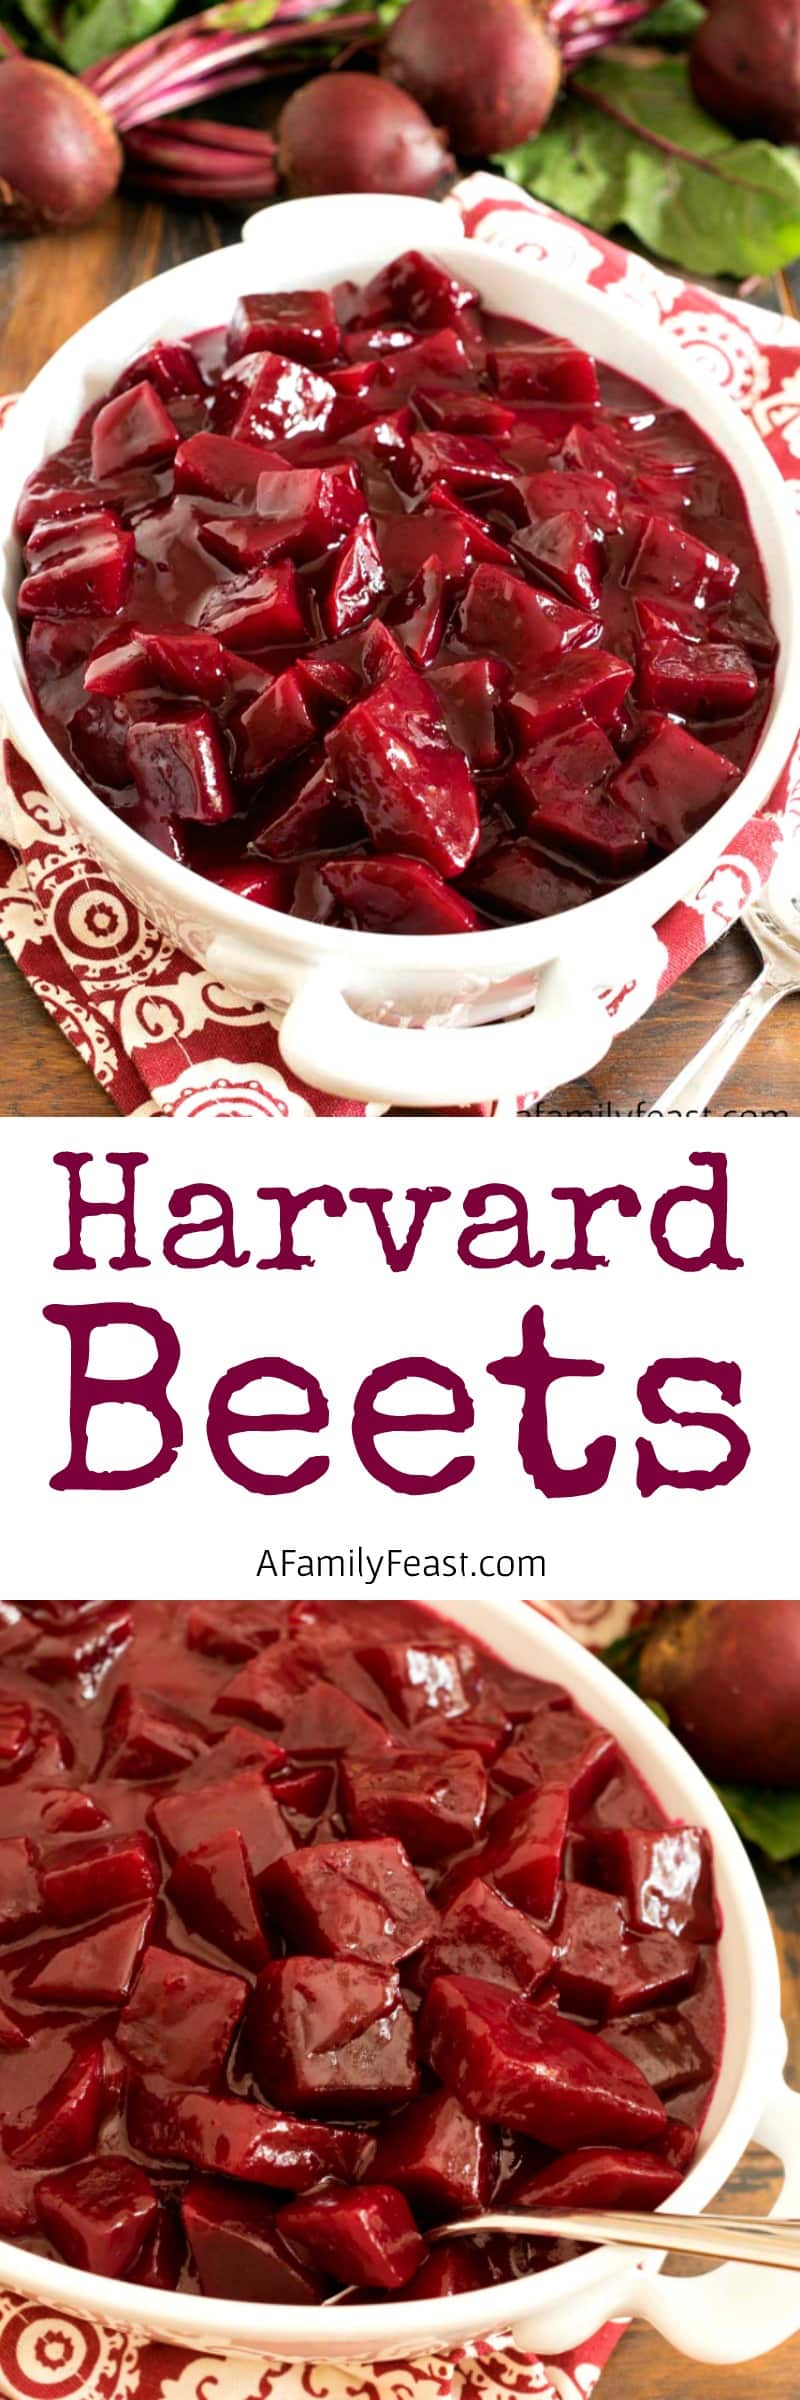 Harvard Beets - Fresh beets in a sweet and sour sauce. So delicious!